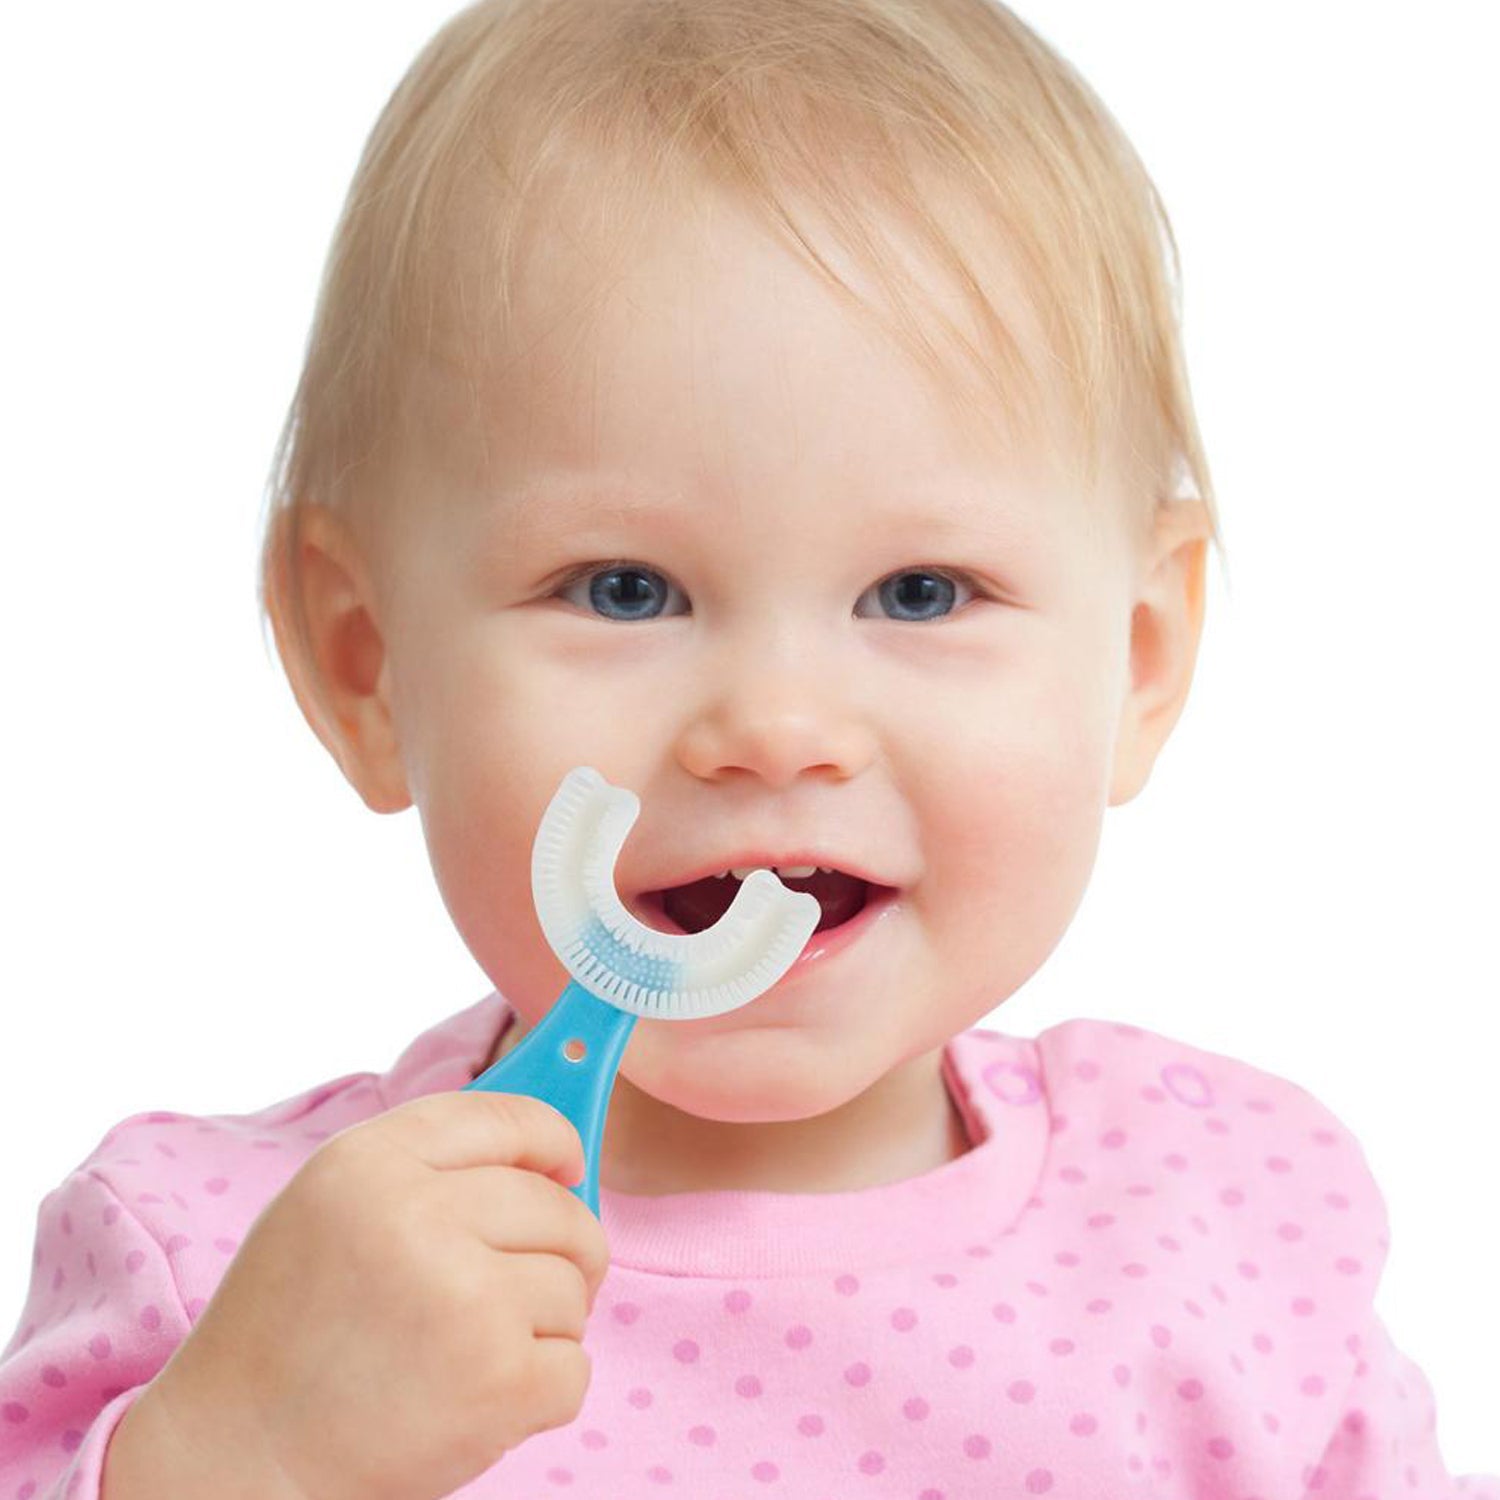 4774 Kids U S Tooth Brush used in all kinds of household bathroom places for washing teeth of kids, toddlers and children’s easily and comfortably. 